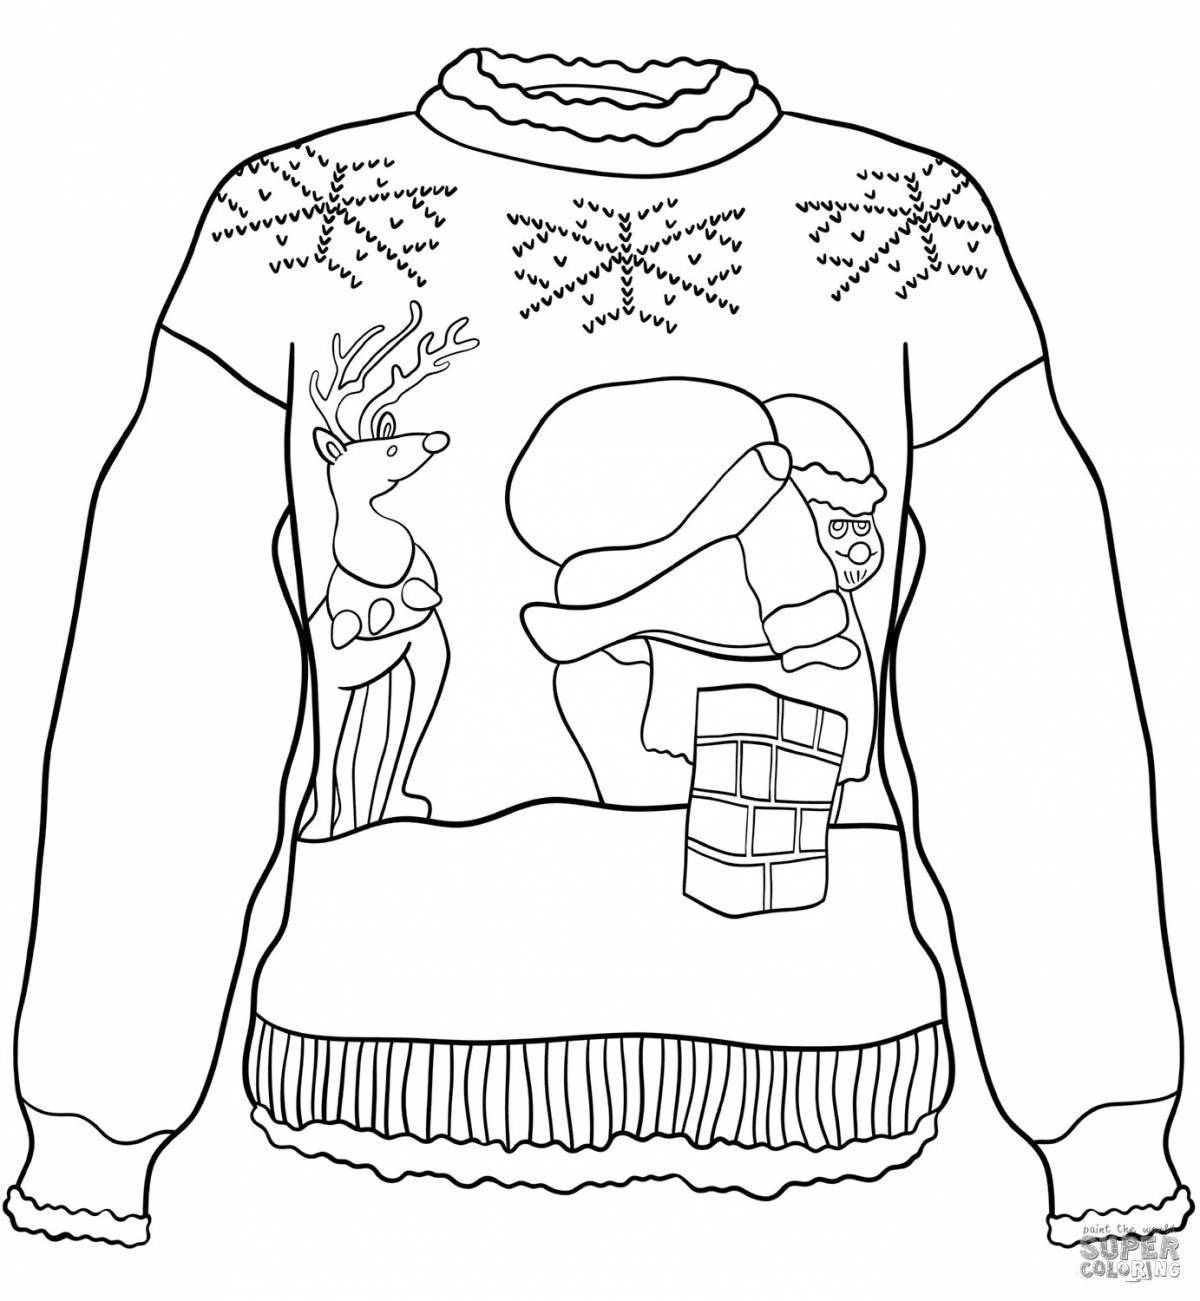 Sparkling sweater coloring page for kids